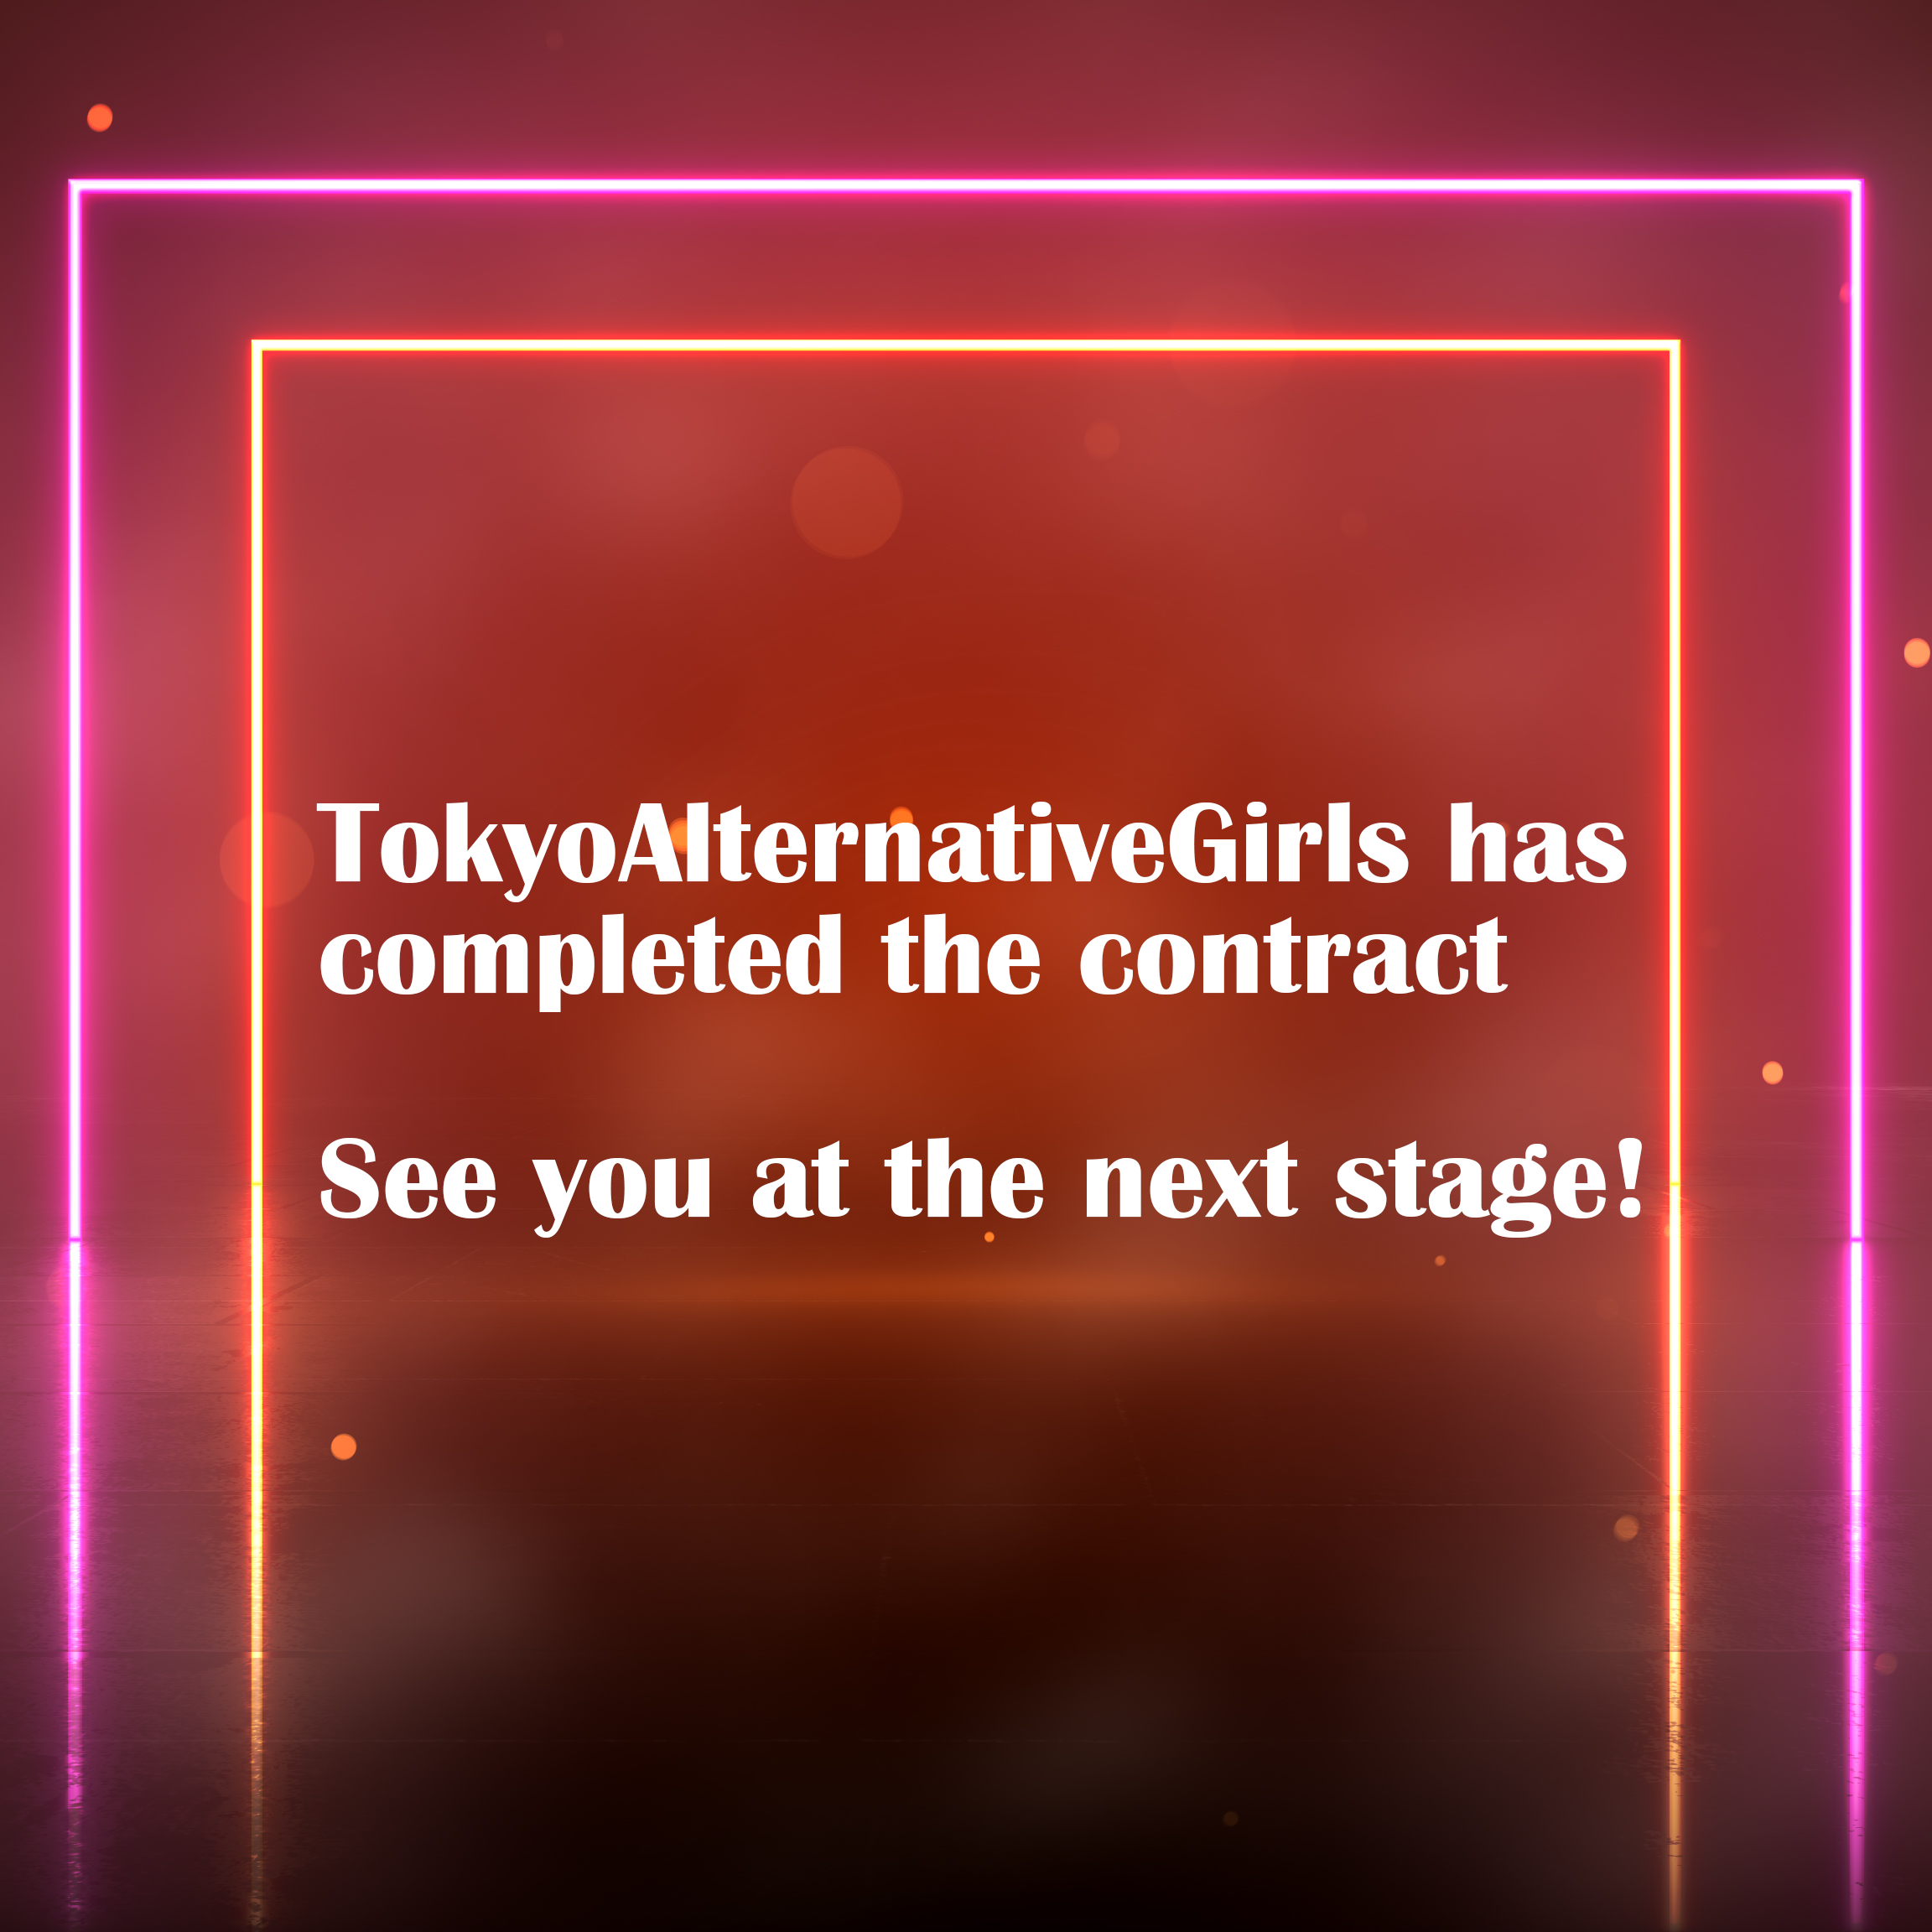 Tokyo Alternative Girls - Old contract #3730